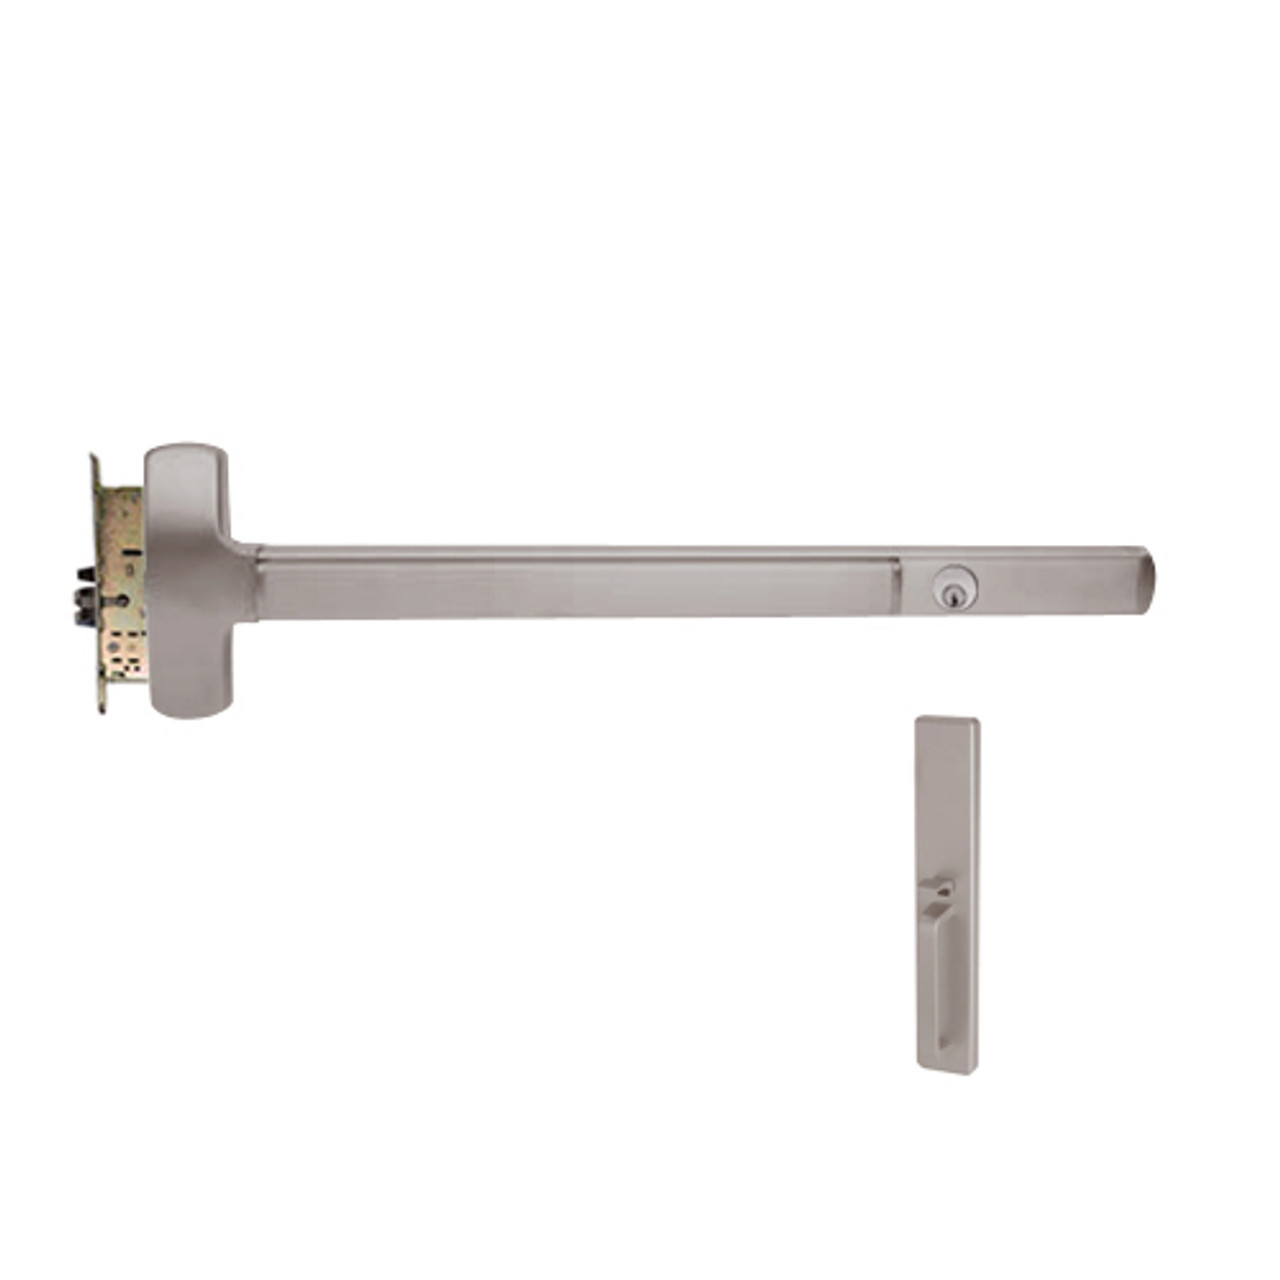 CD25-M-TP-BE-US28-4-LHR Falcon Exit Device in Anodized Aluminum